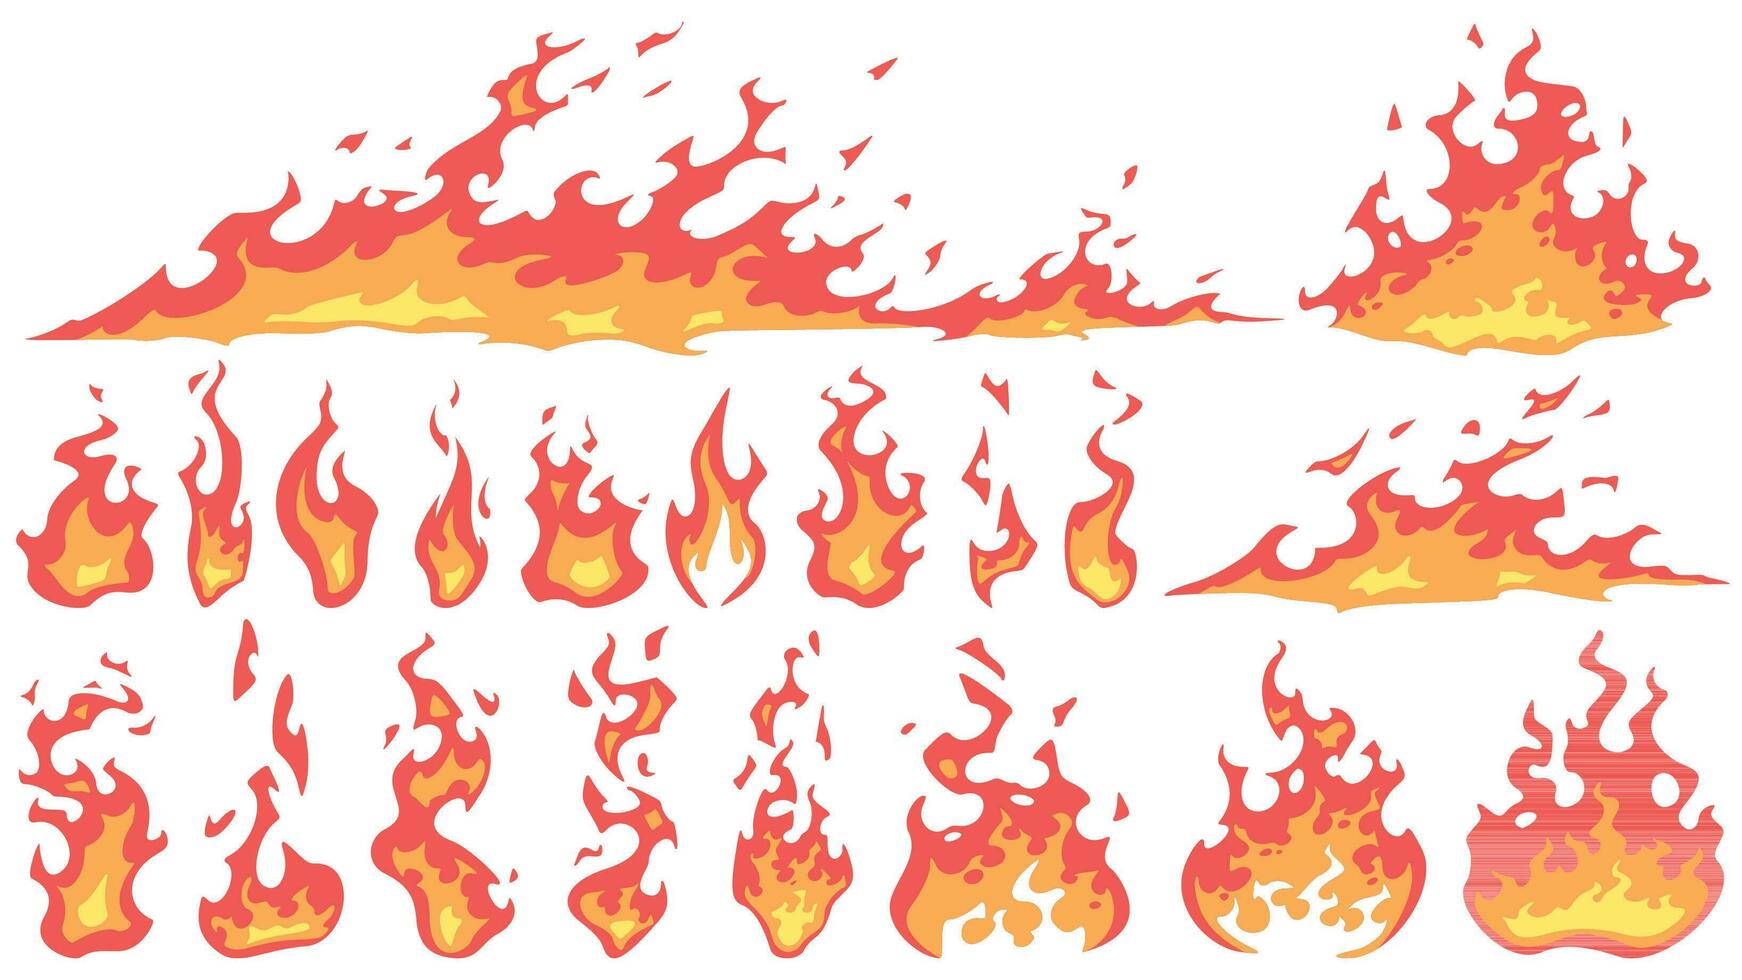 Cartoon fire flames. Fireball flame, red hot fire and campfire fiery silhouettes vector set. Burning effect, dangerous natural phenomenon. Blazing wildfire isolated on white background